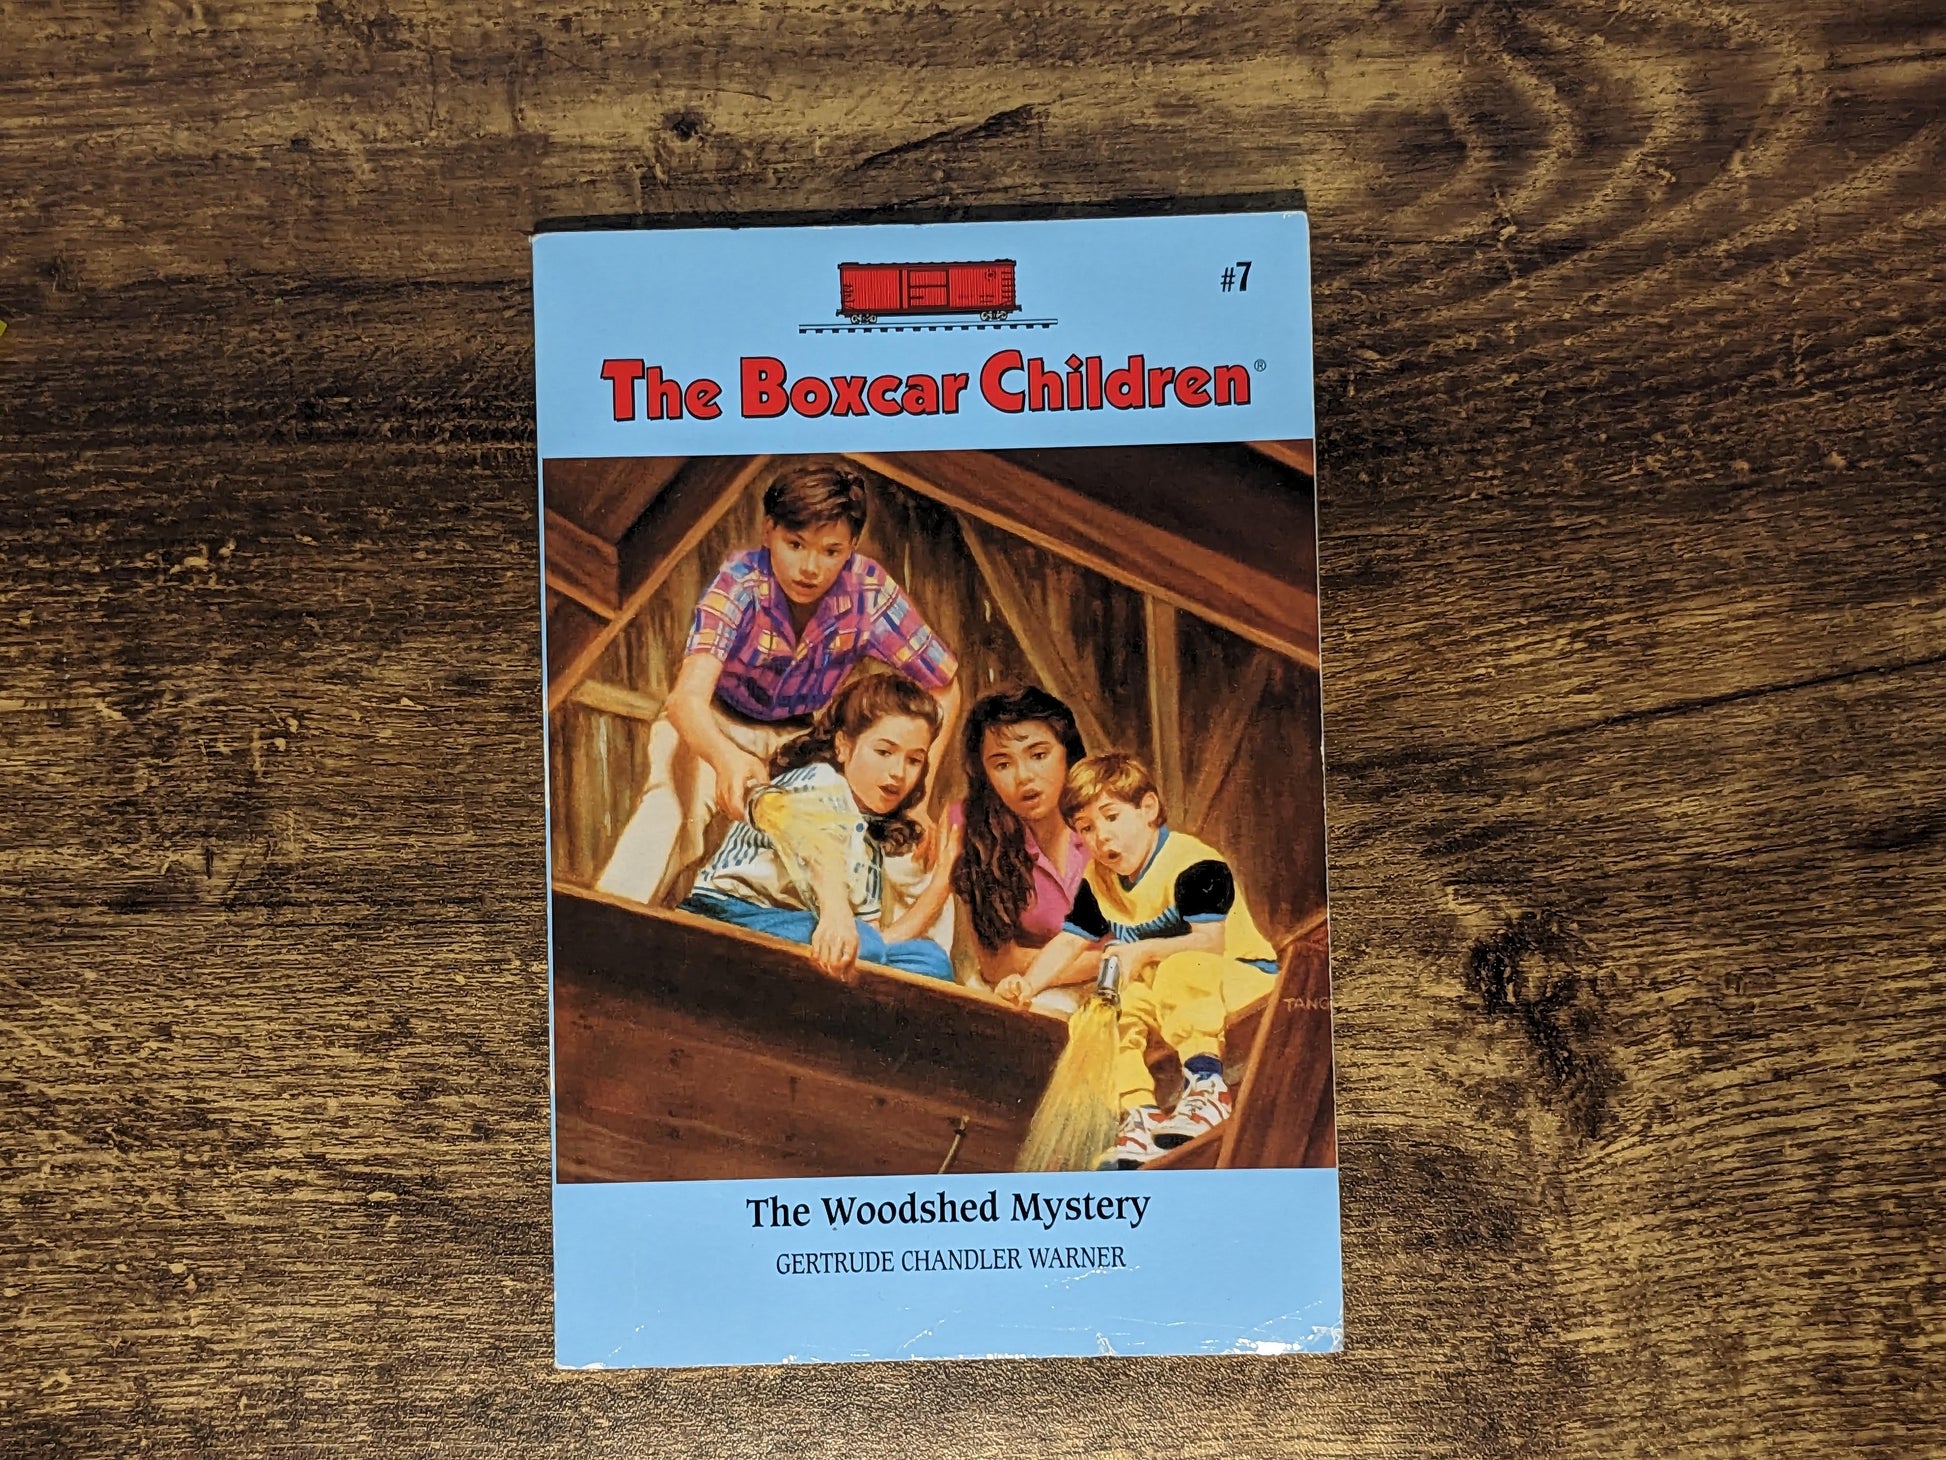 Woodshed Mystery, The (Boxcar Children Mysteries #7) by Gertrude Chandler Warner - Asylum Books